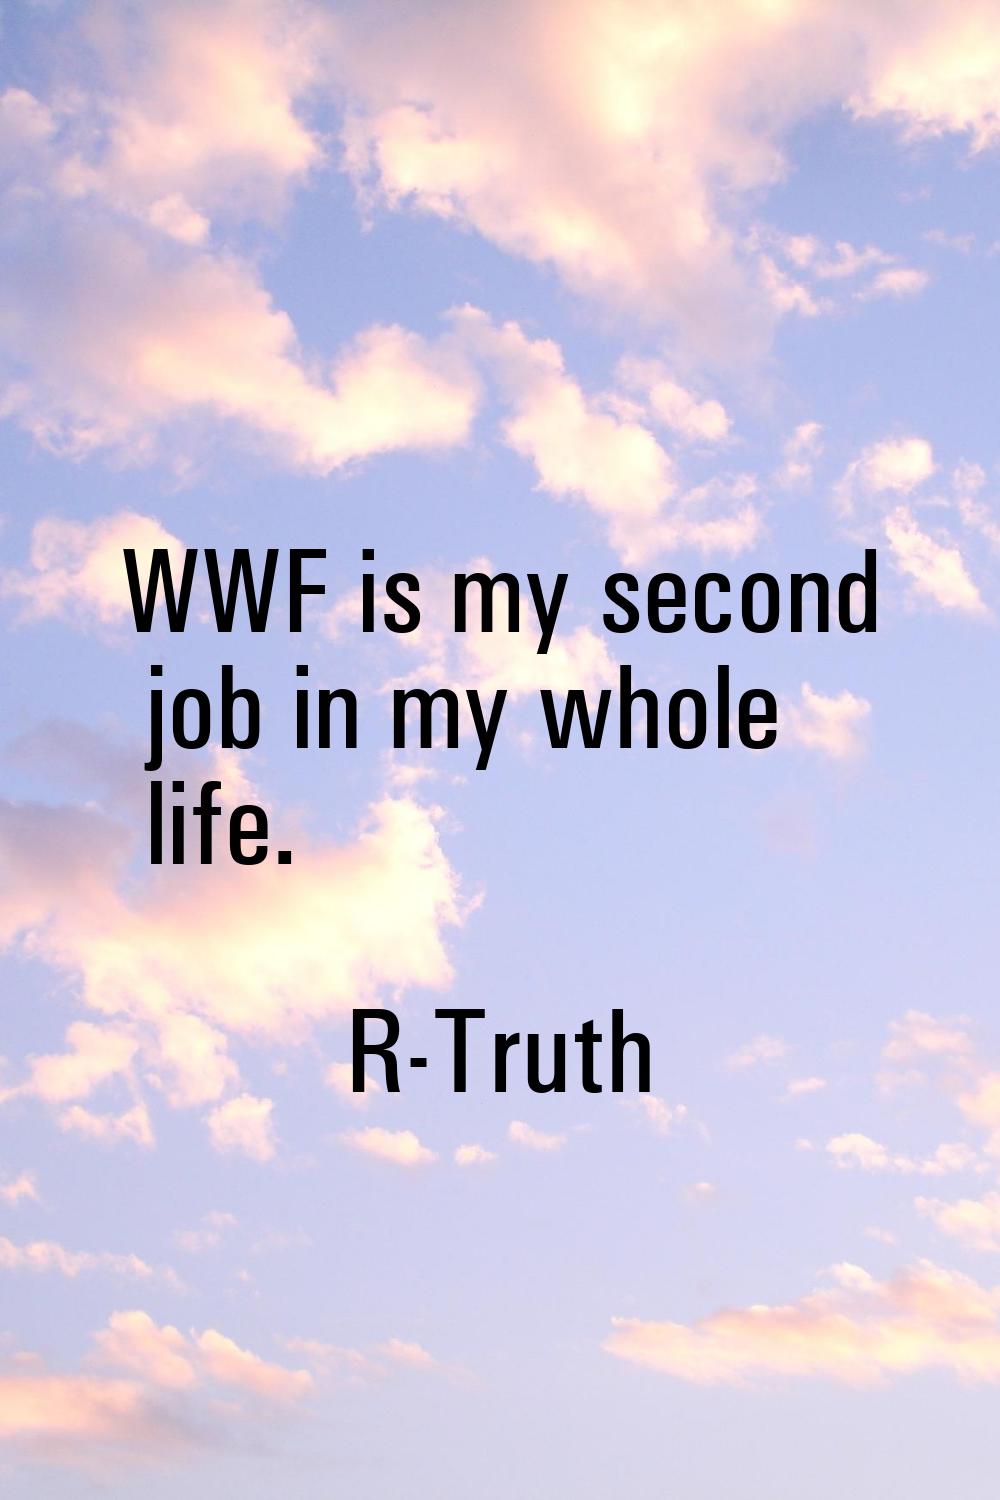 WWF is my second job in my whole life.